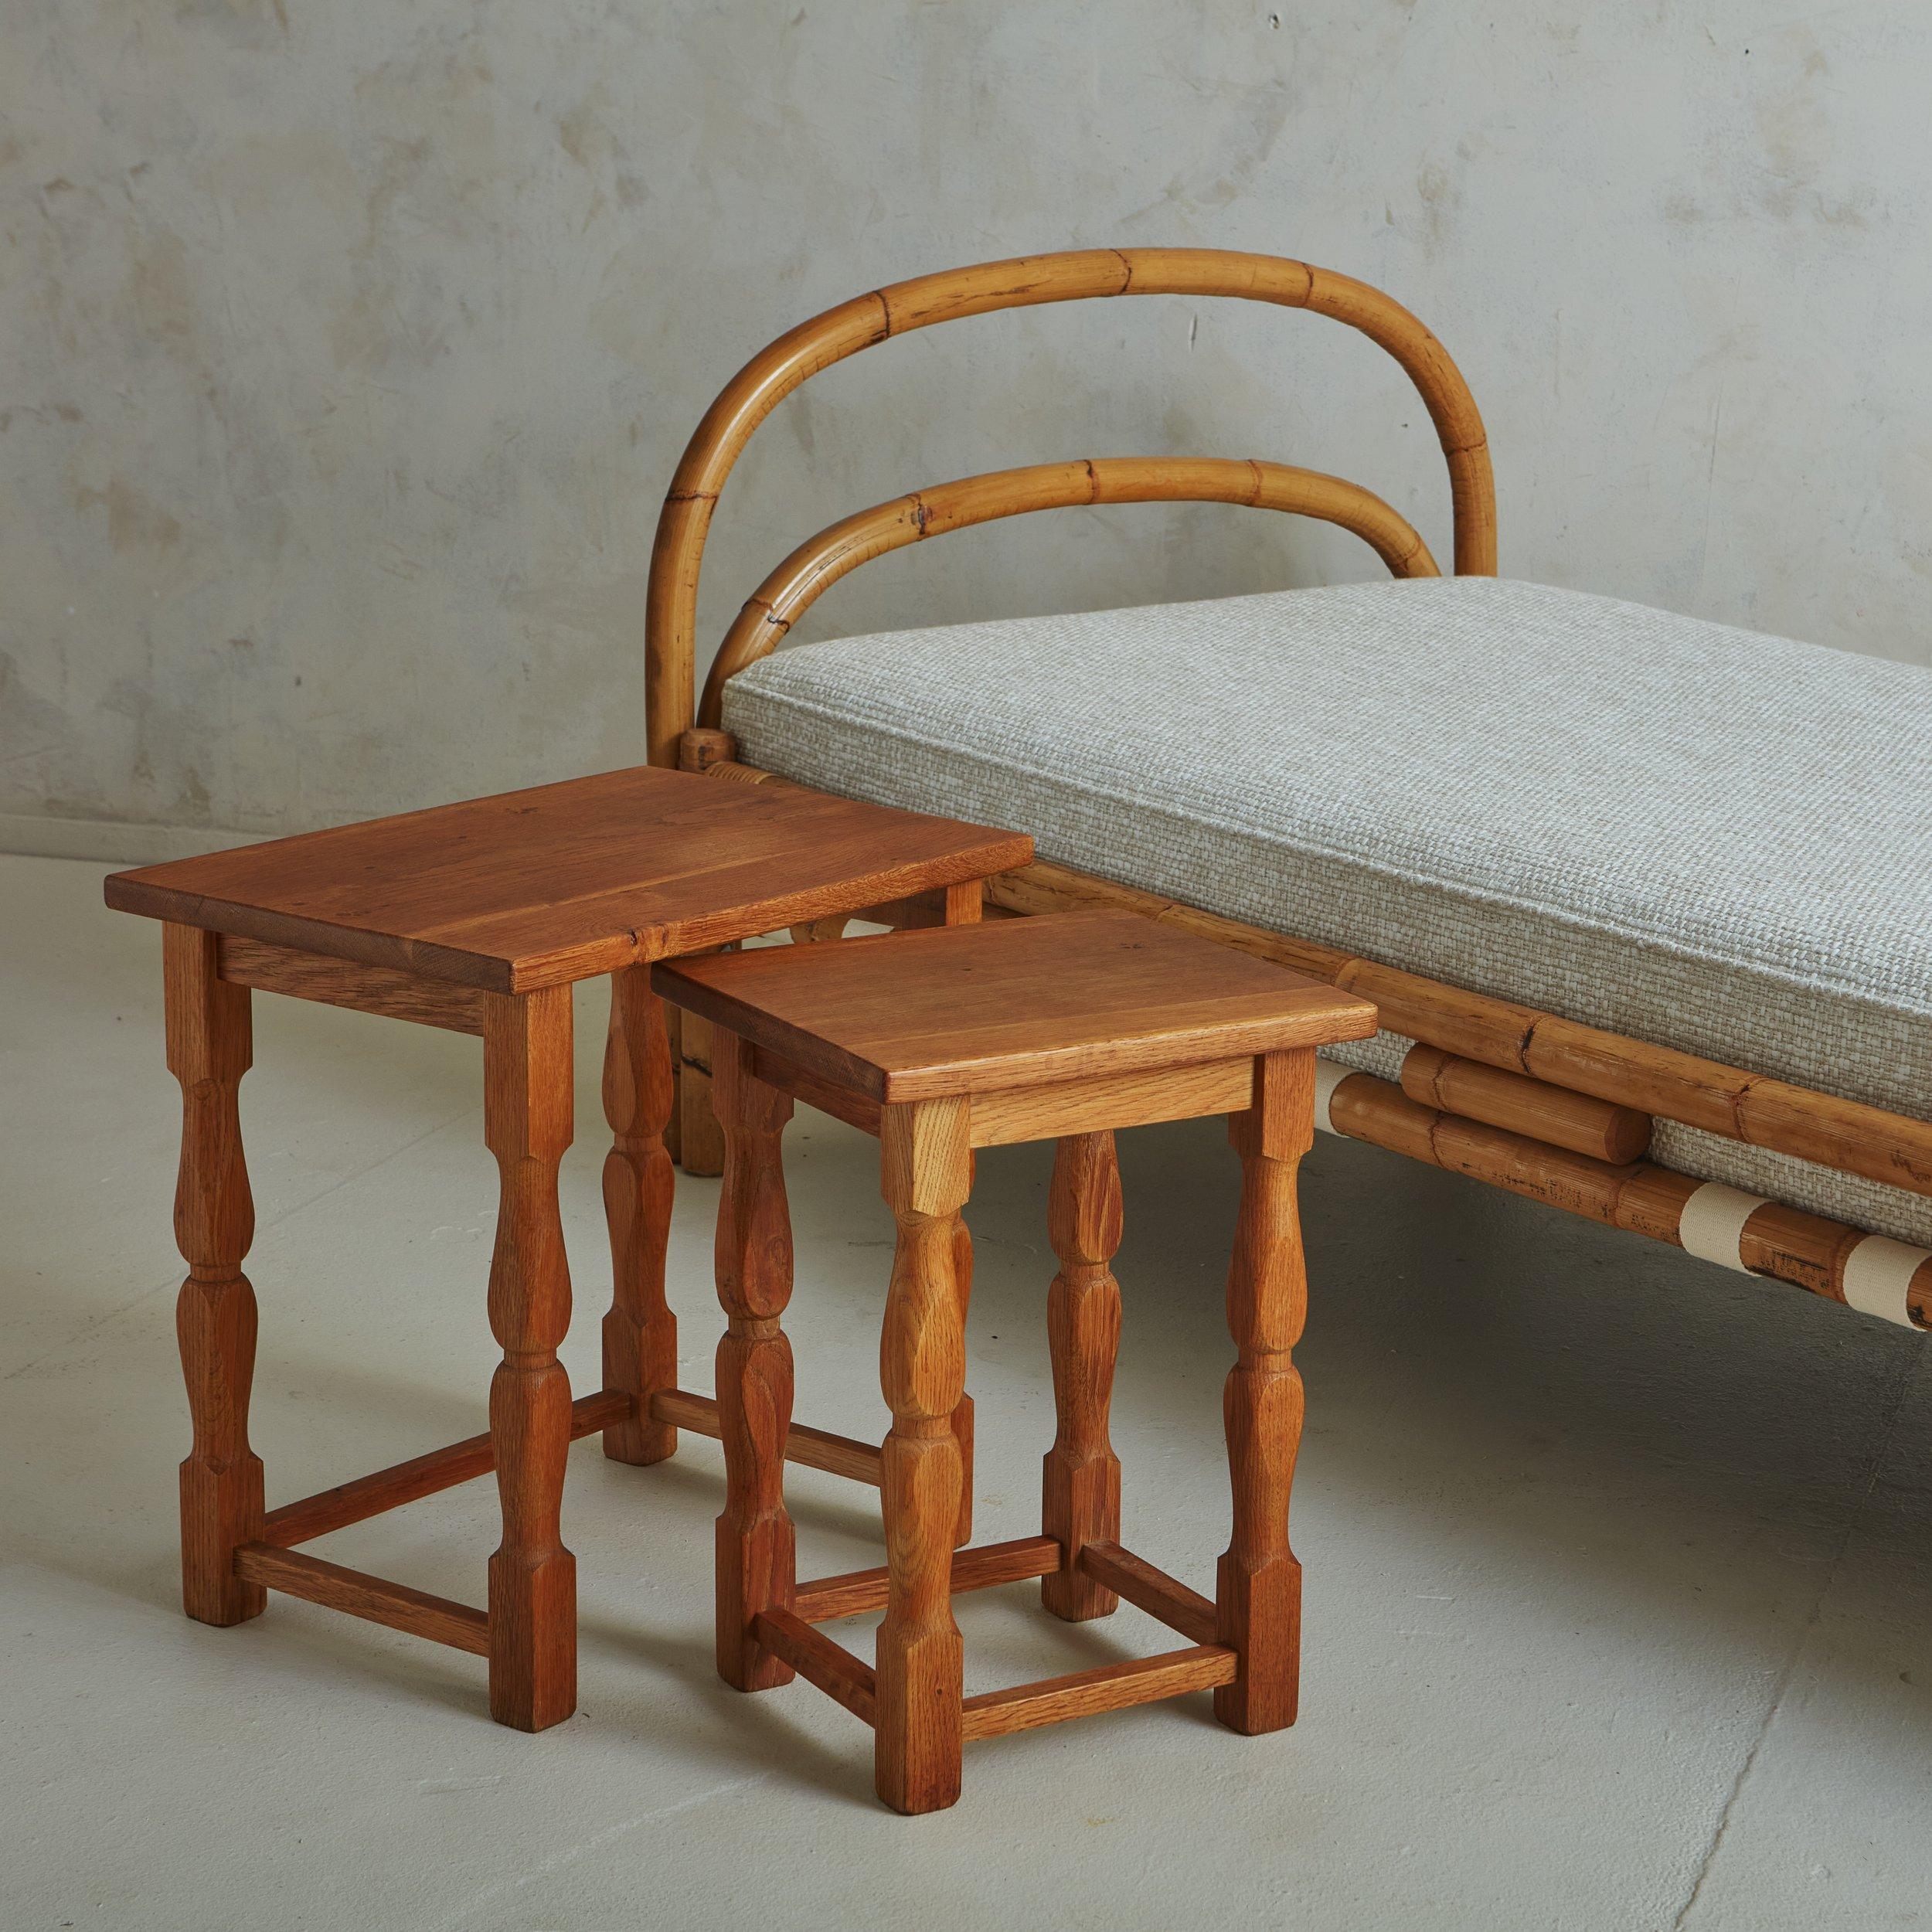 A trio of vintage wooden side tables sourced in Sweden. These tables have rectangular tabletops with spindle legs and lower stretcher details. They feature a beautiful wood grain and the versatile trio nests together, perfect for floating between